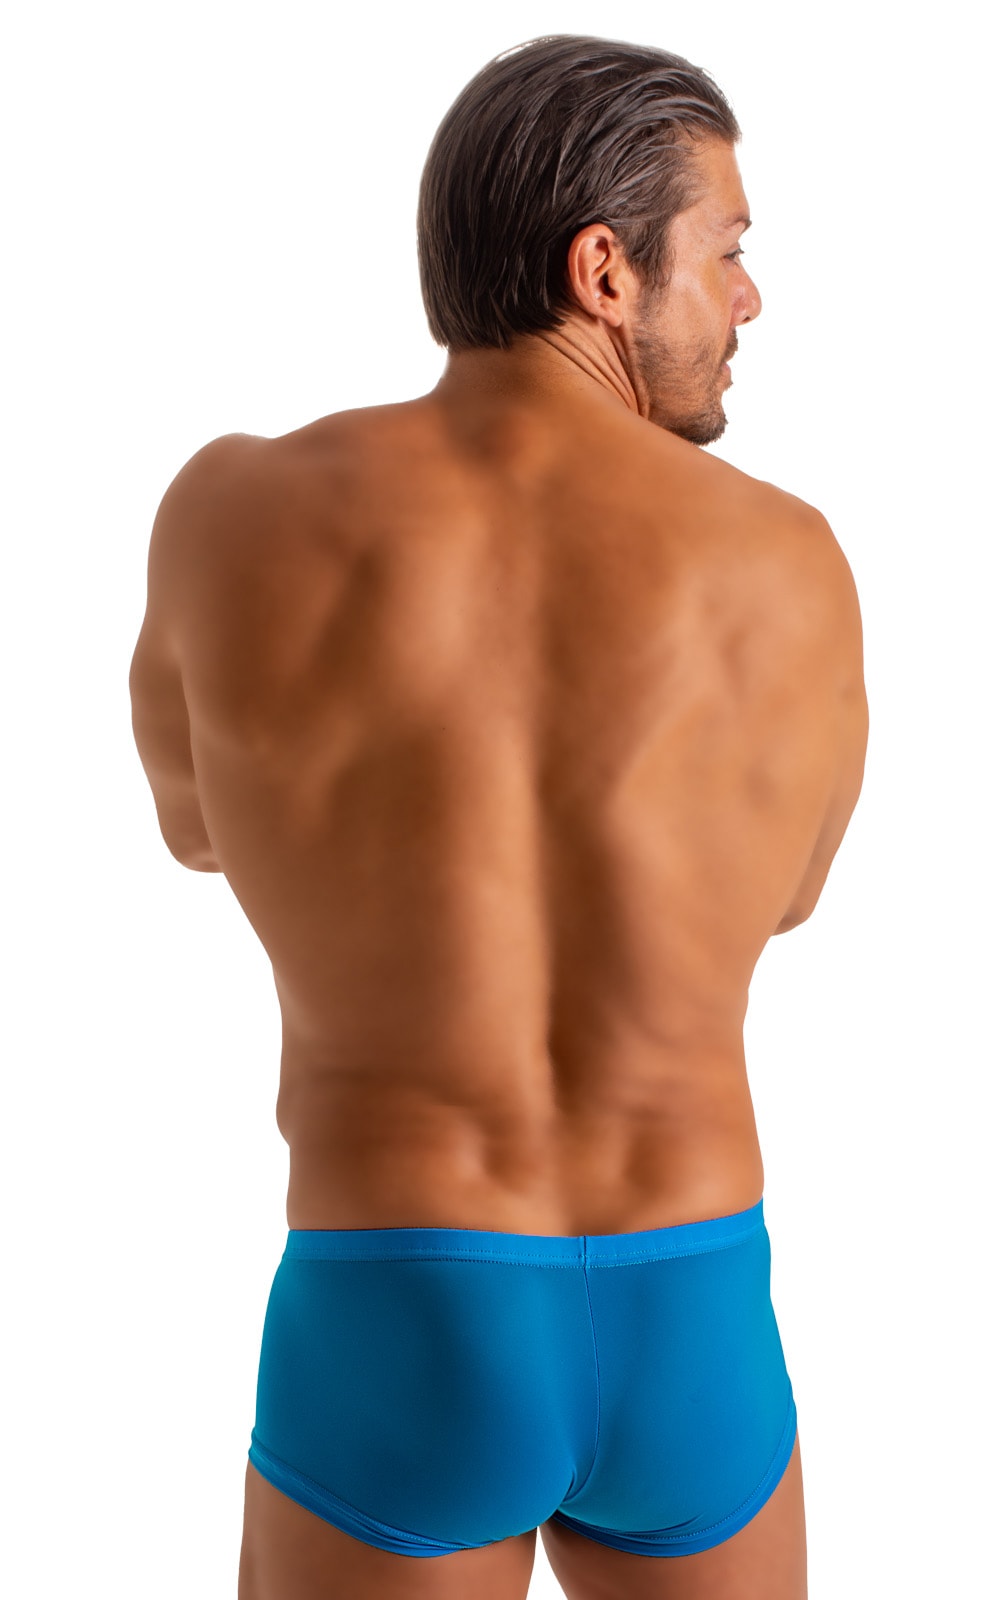 Extreme Low Square Cut Swim Trunks in Super ThinSKINZ Turquoise 8